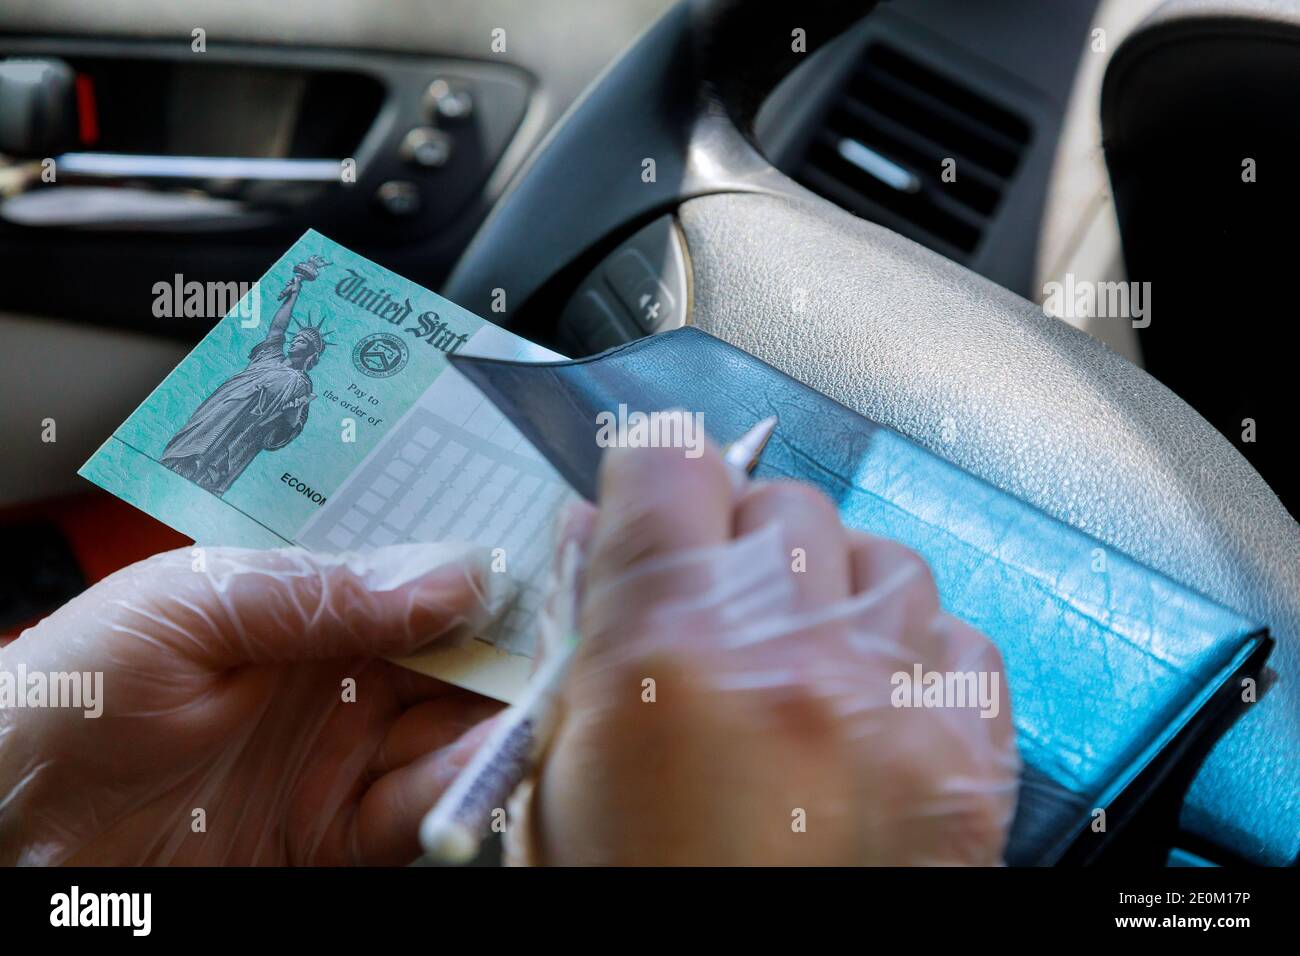 Writing a paper slip depositing government stimulus check with gloves on for safety in car soft focus Stock Photo